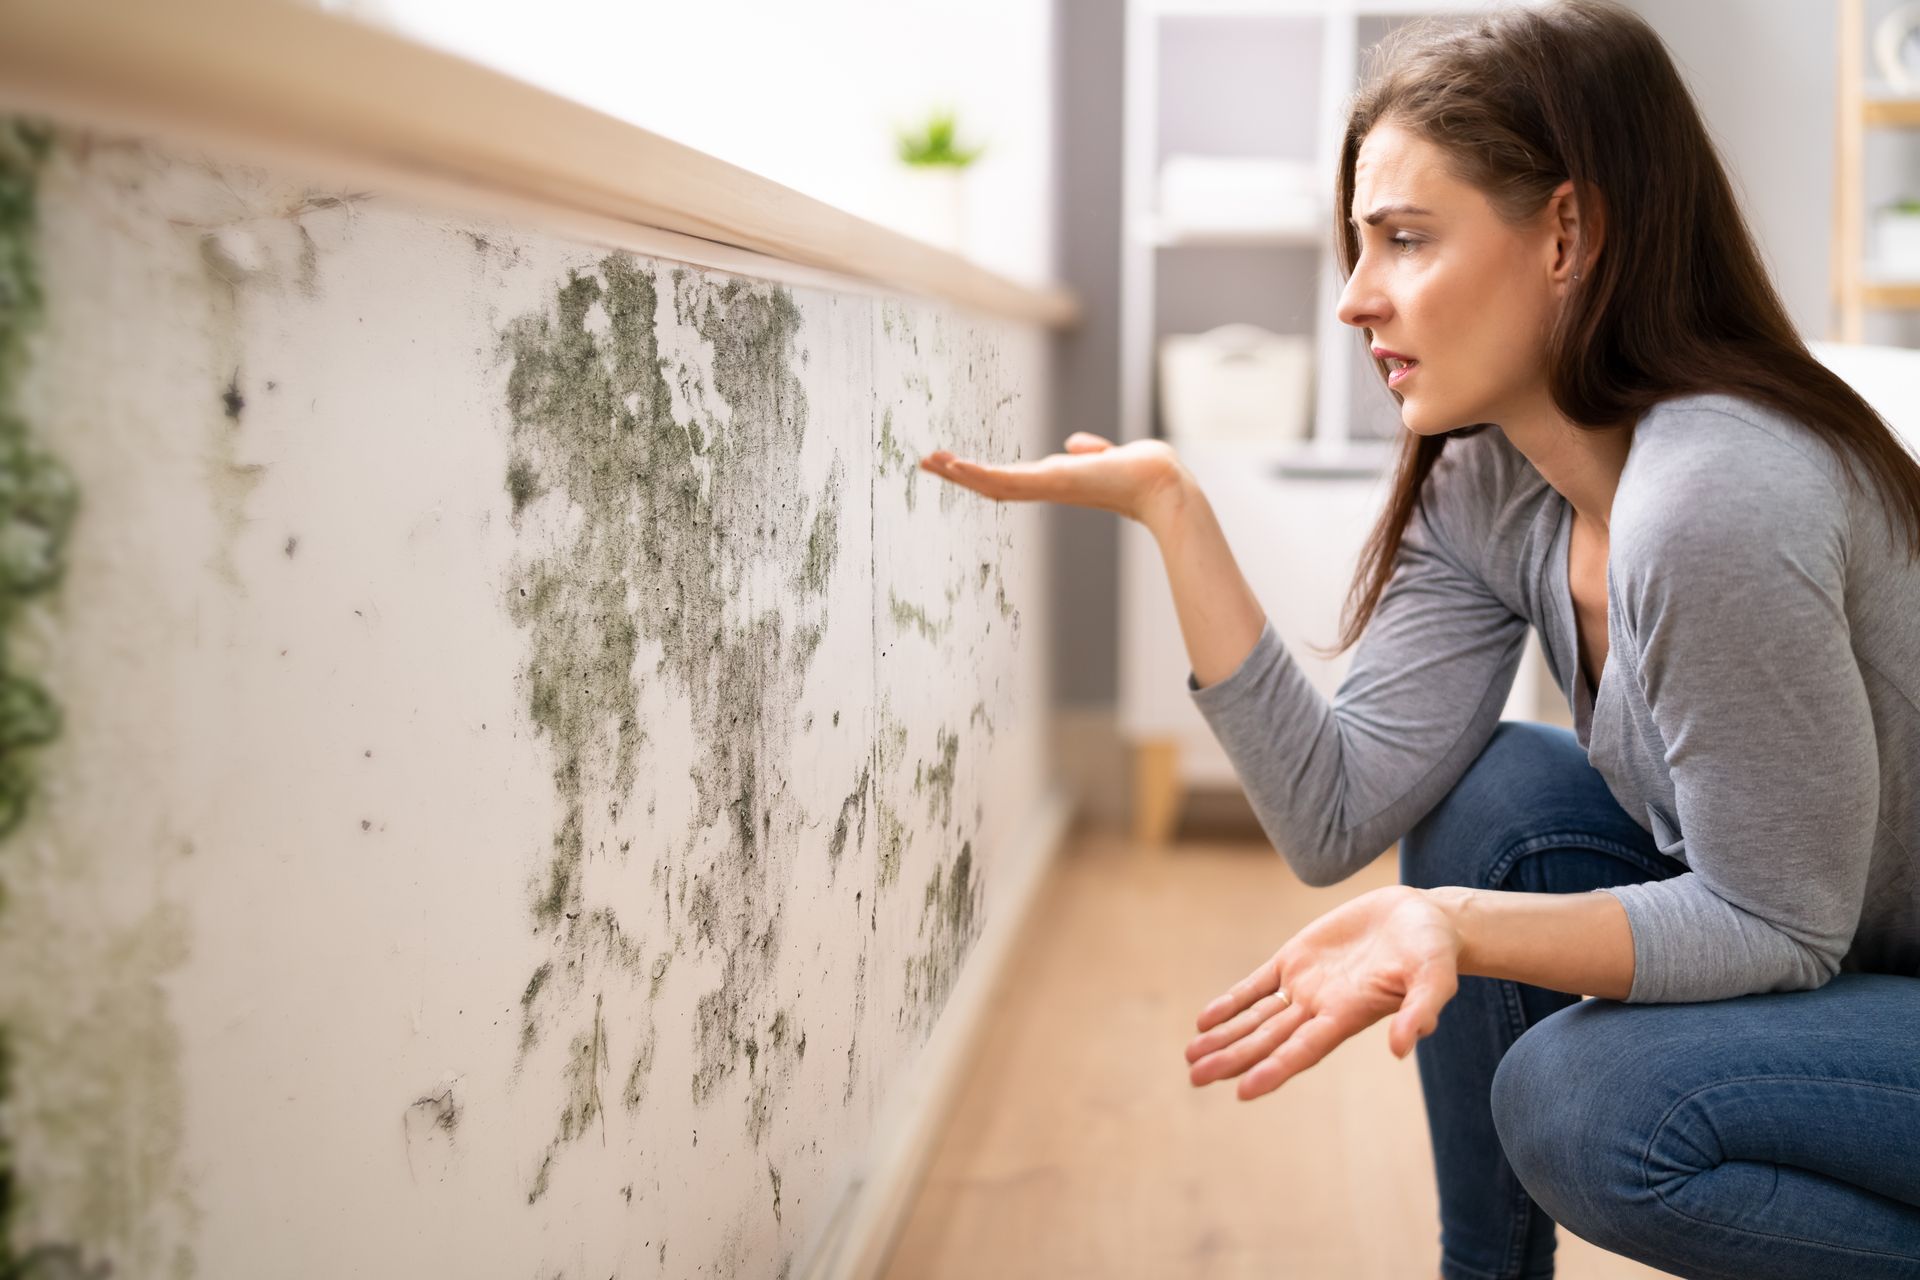 a woman is kneeling down in front of a wall with mold on it .